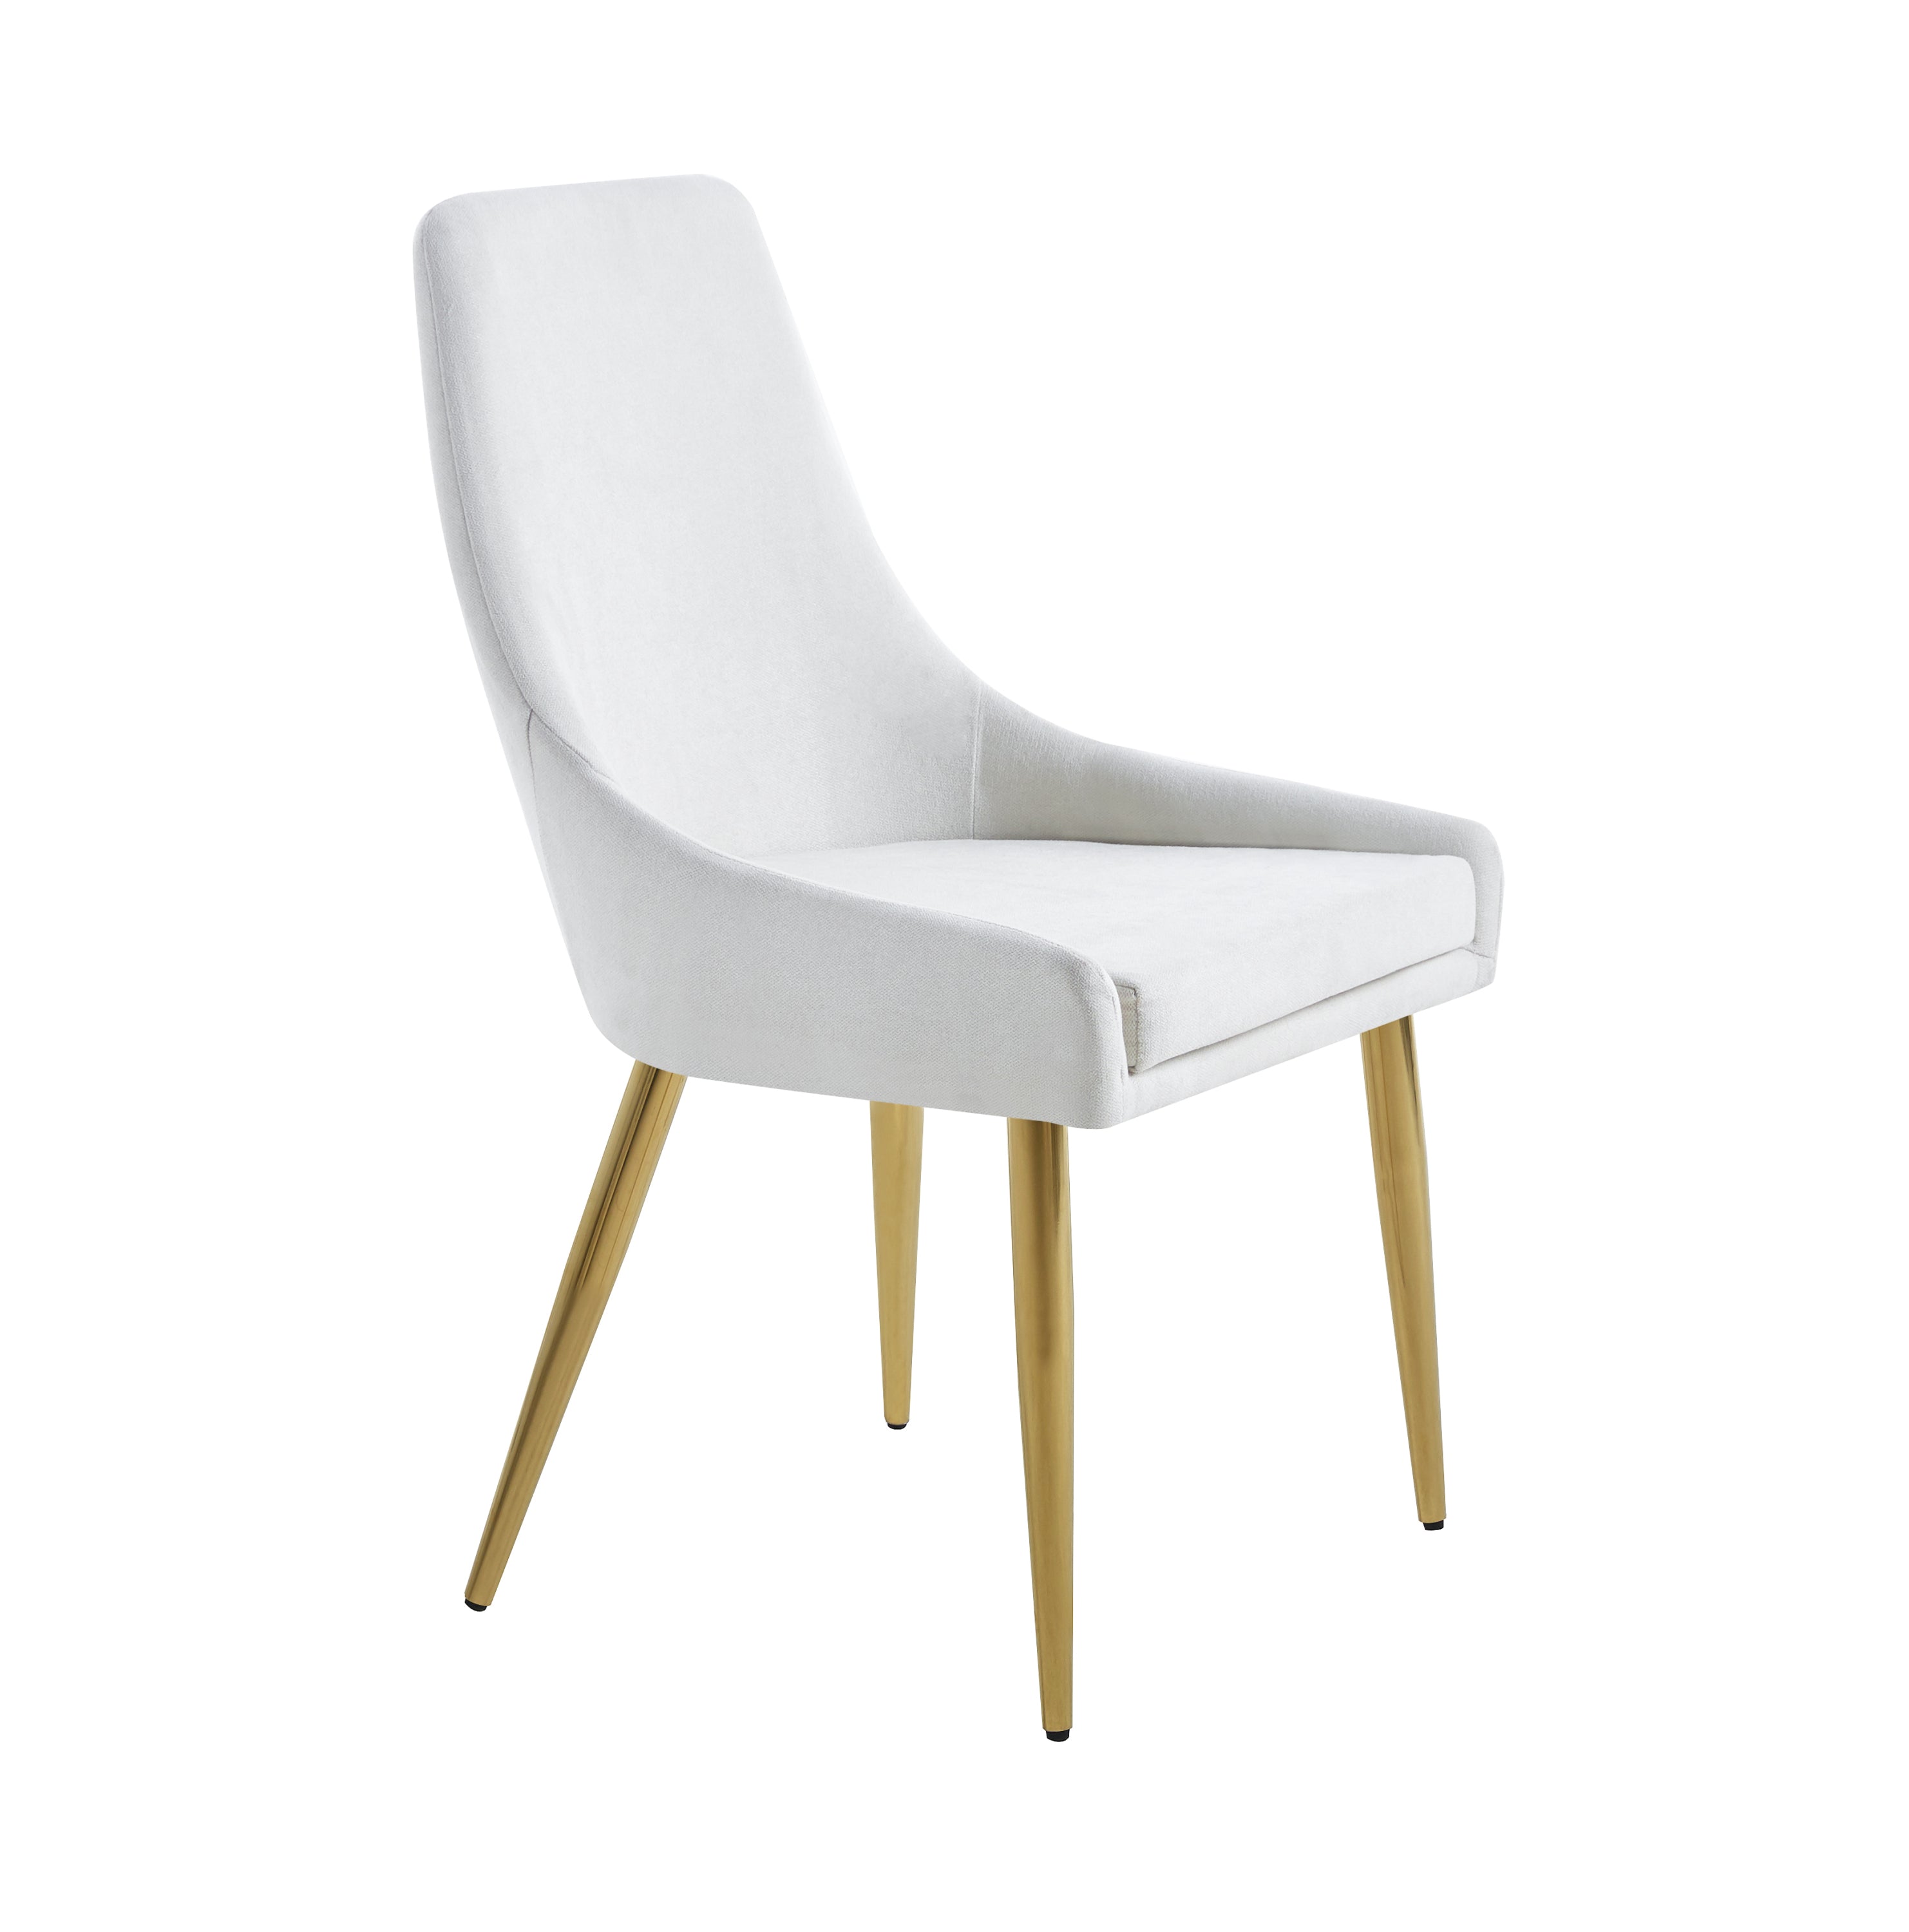 Dining Chairs Classical Appearance and Stainless Steel (Set of 2) - White and Gold